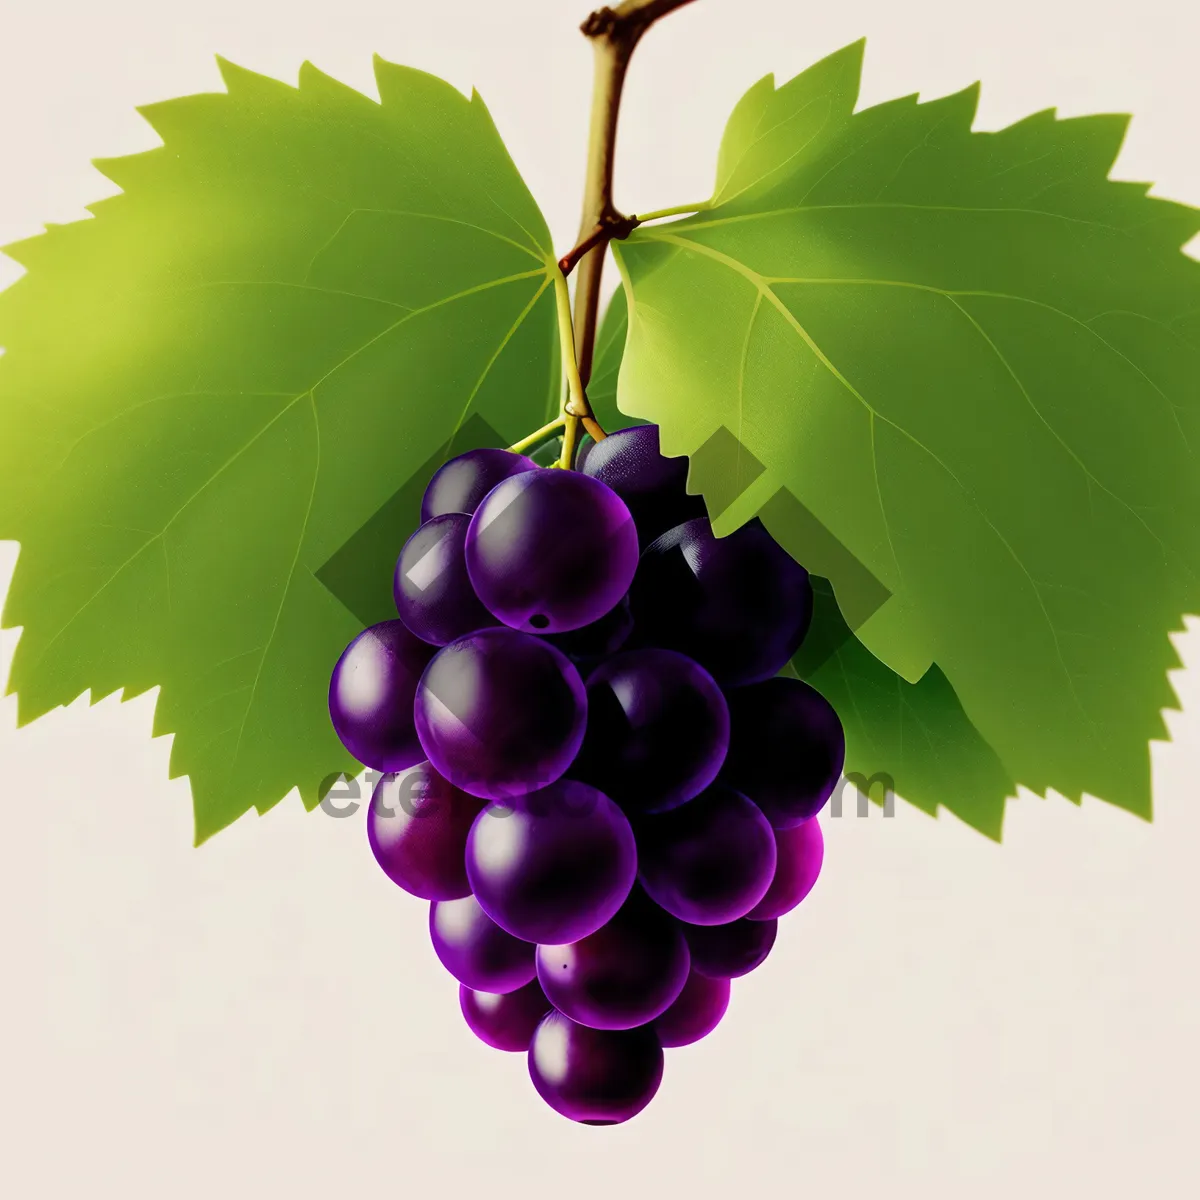 Picture of Fresh Juicy Grapes on Vine: Naturally Ripe and Healthy